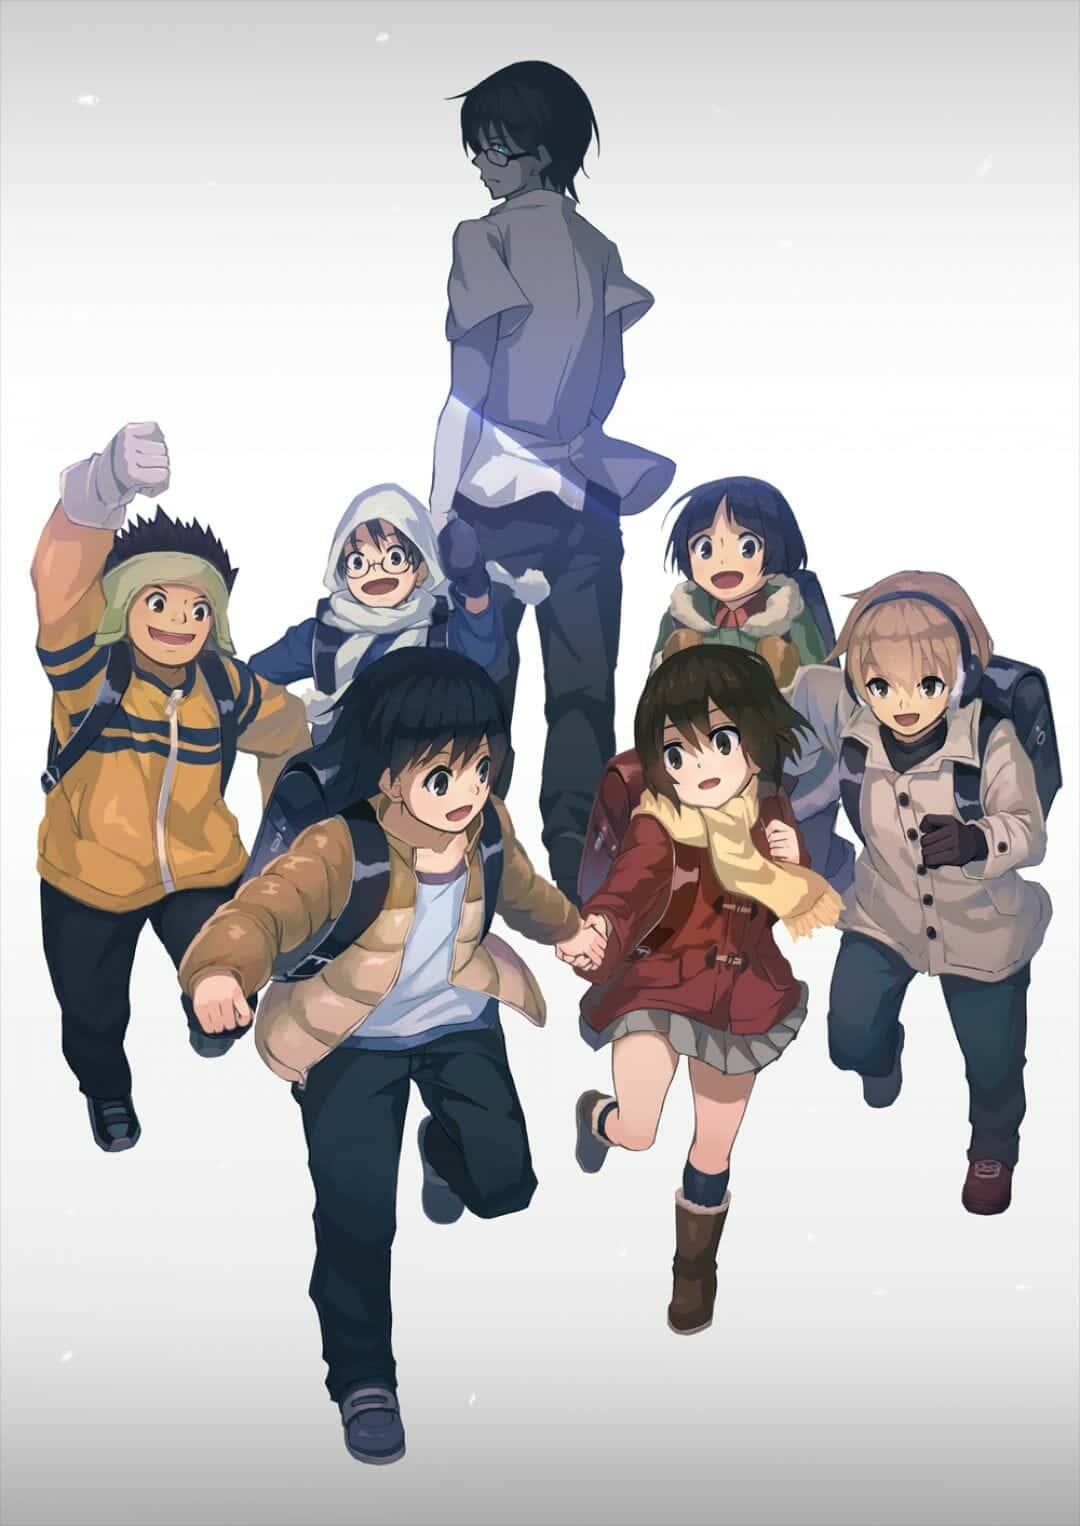 A Poignant Moment In Erased Anime Featuring Main